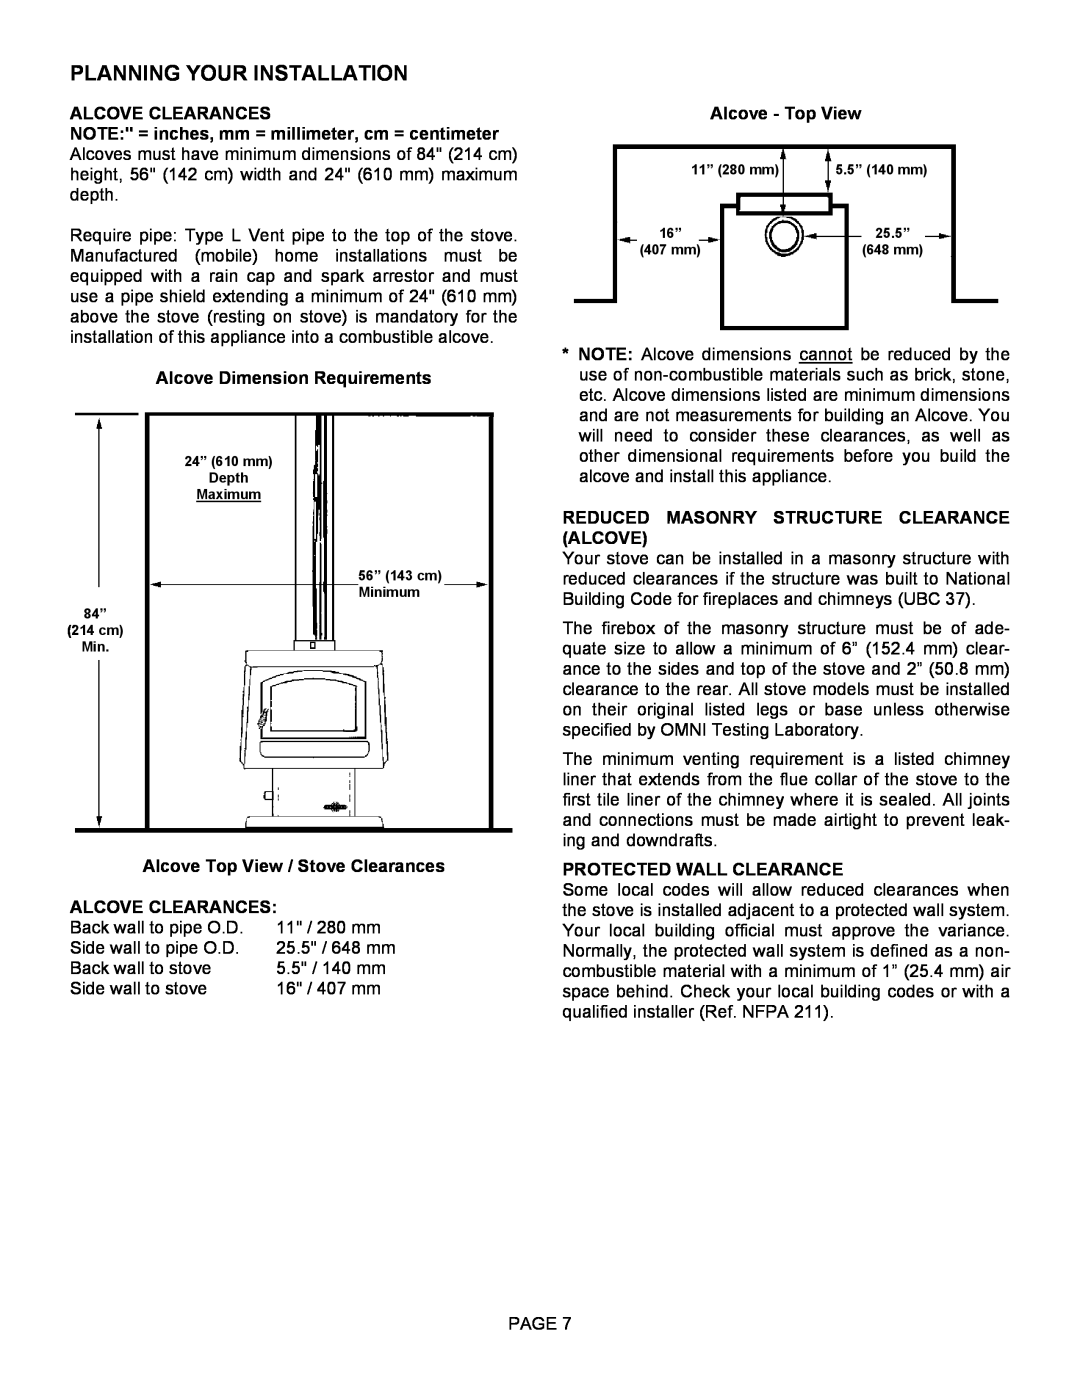 Lennox Hearth 1003C operation manual Alcove Clearances, Alcove Dimension Requirements, Alcove Top View / Stove Clearances 